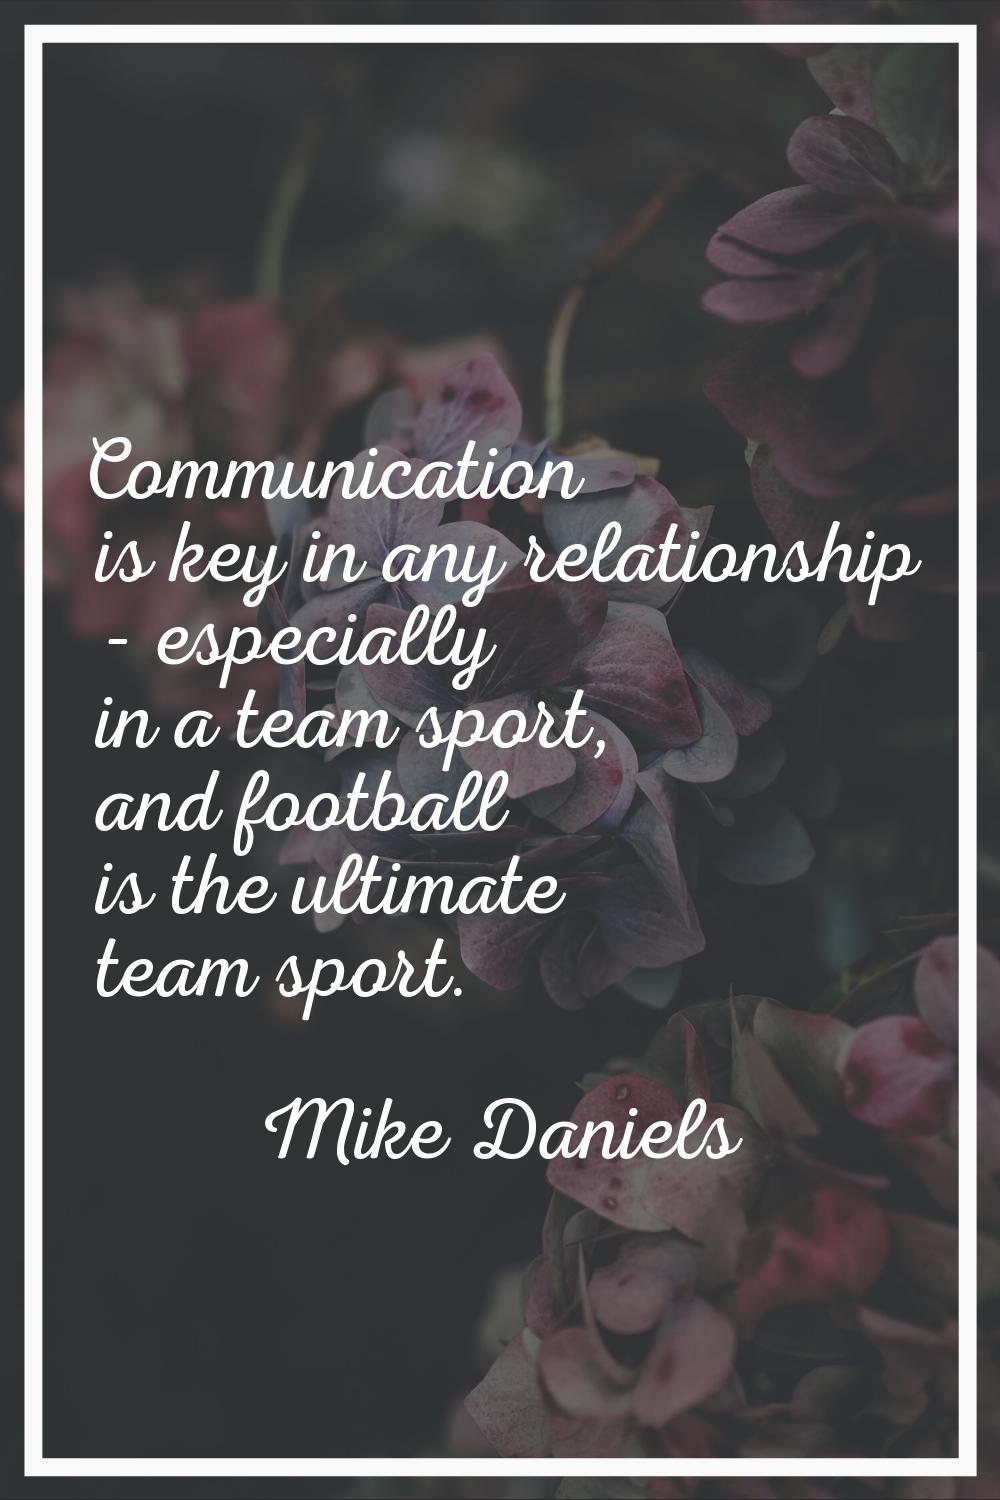 Communication is key in any relationship - especially in a team sport, and football is the ultimate